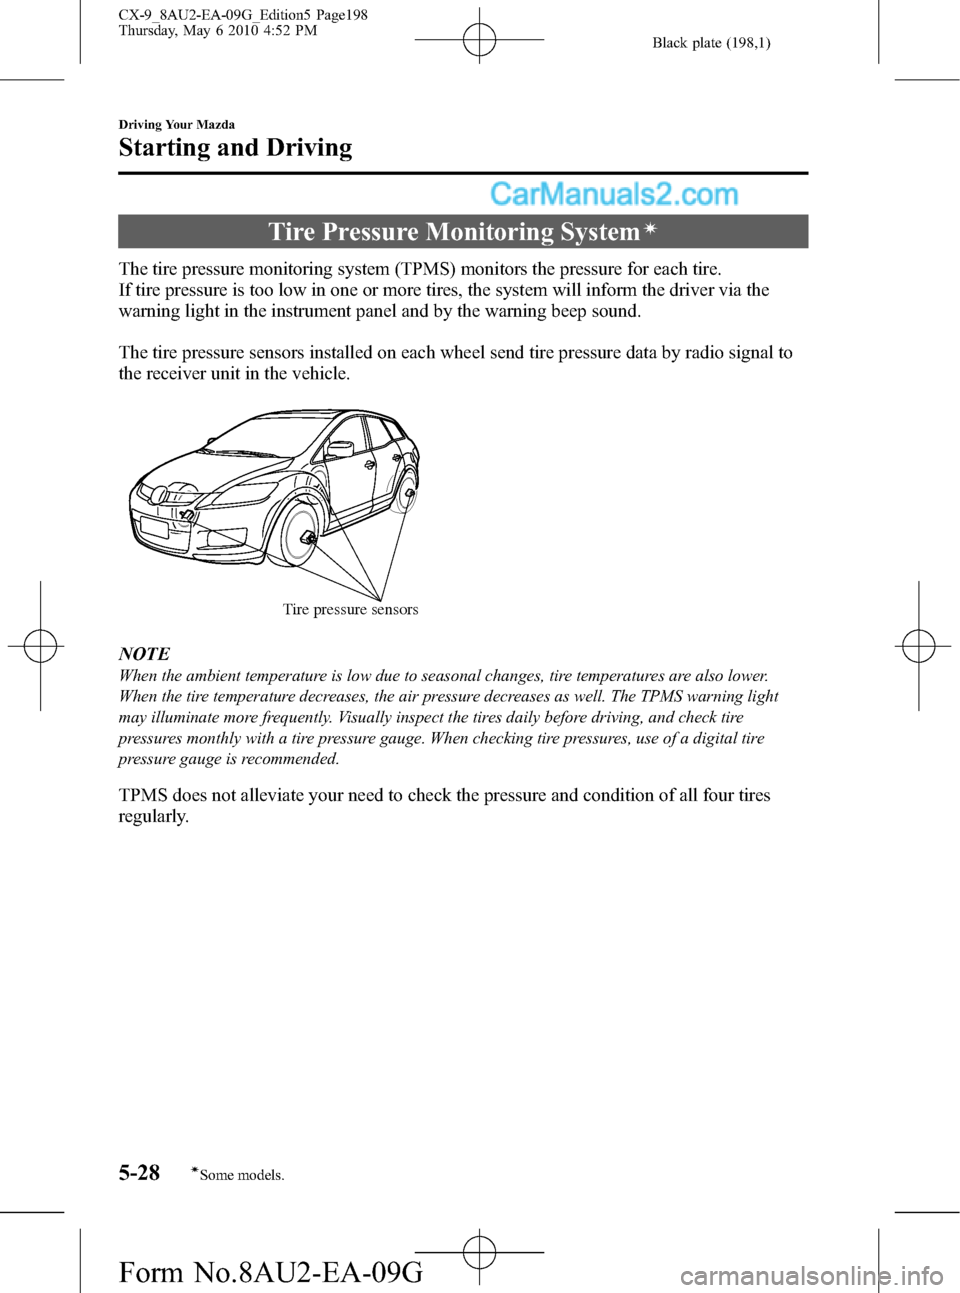 MAZDA MODEL CX-9 2010  Owners Manual (in English) Black plate (198,1)
Tire Pressure Monitoring Systemí
The tire pressure monitoring system (TPMS) monitors the pressure for each tire.
If tire pressure is too low in one or more tires, the system will 